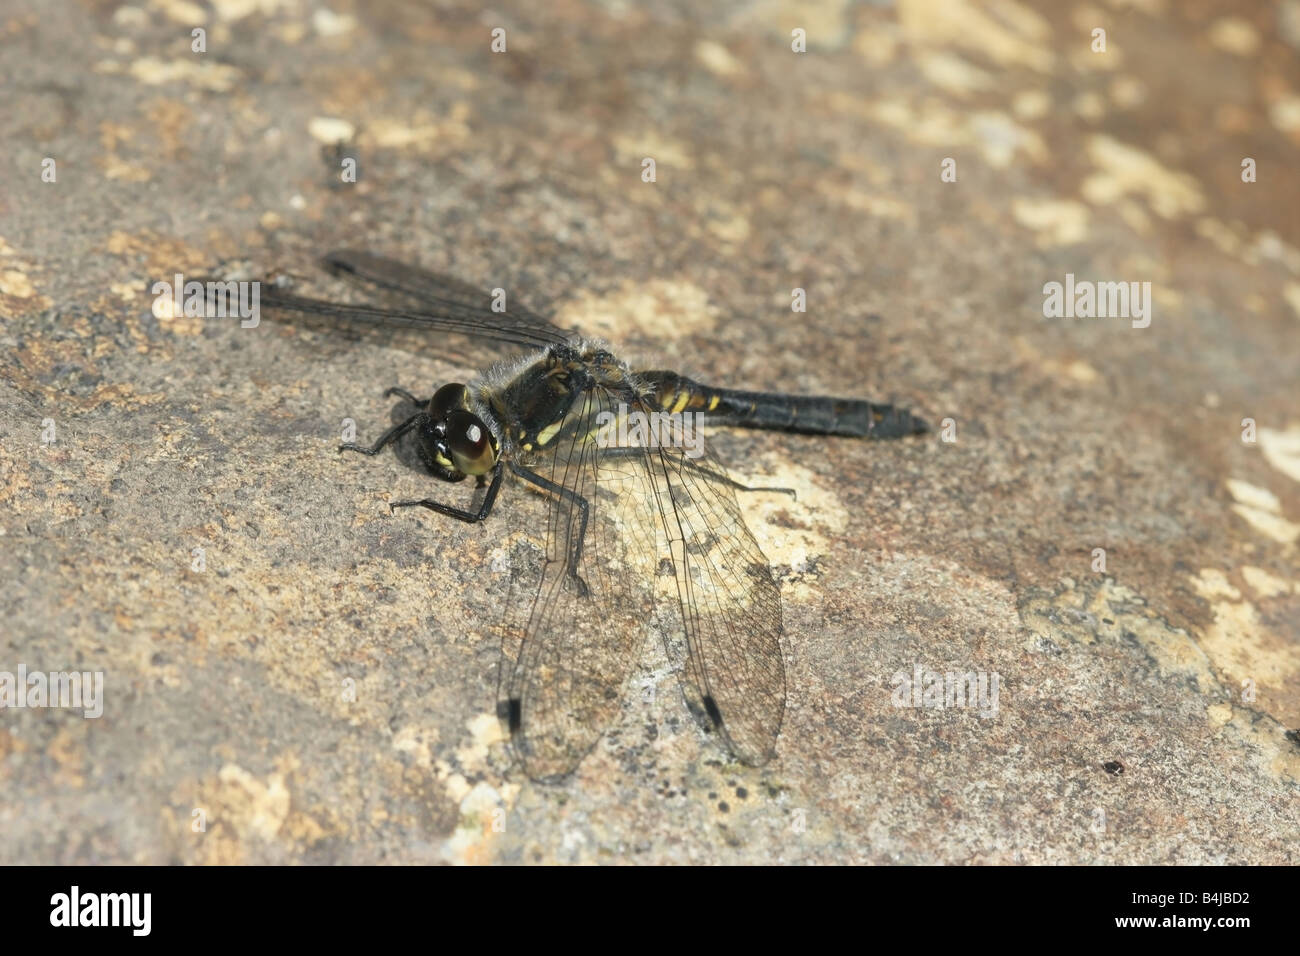 Nero Darter Dragonfly Sympetrum danae Falcon Clints Fiume Tees Teesdale superiore Foto Stock